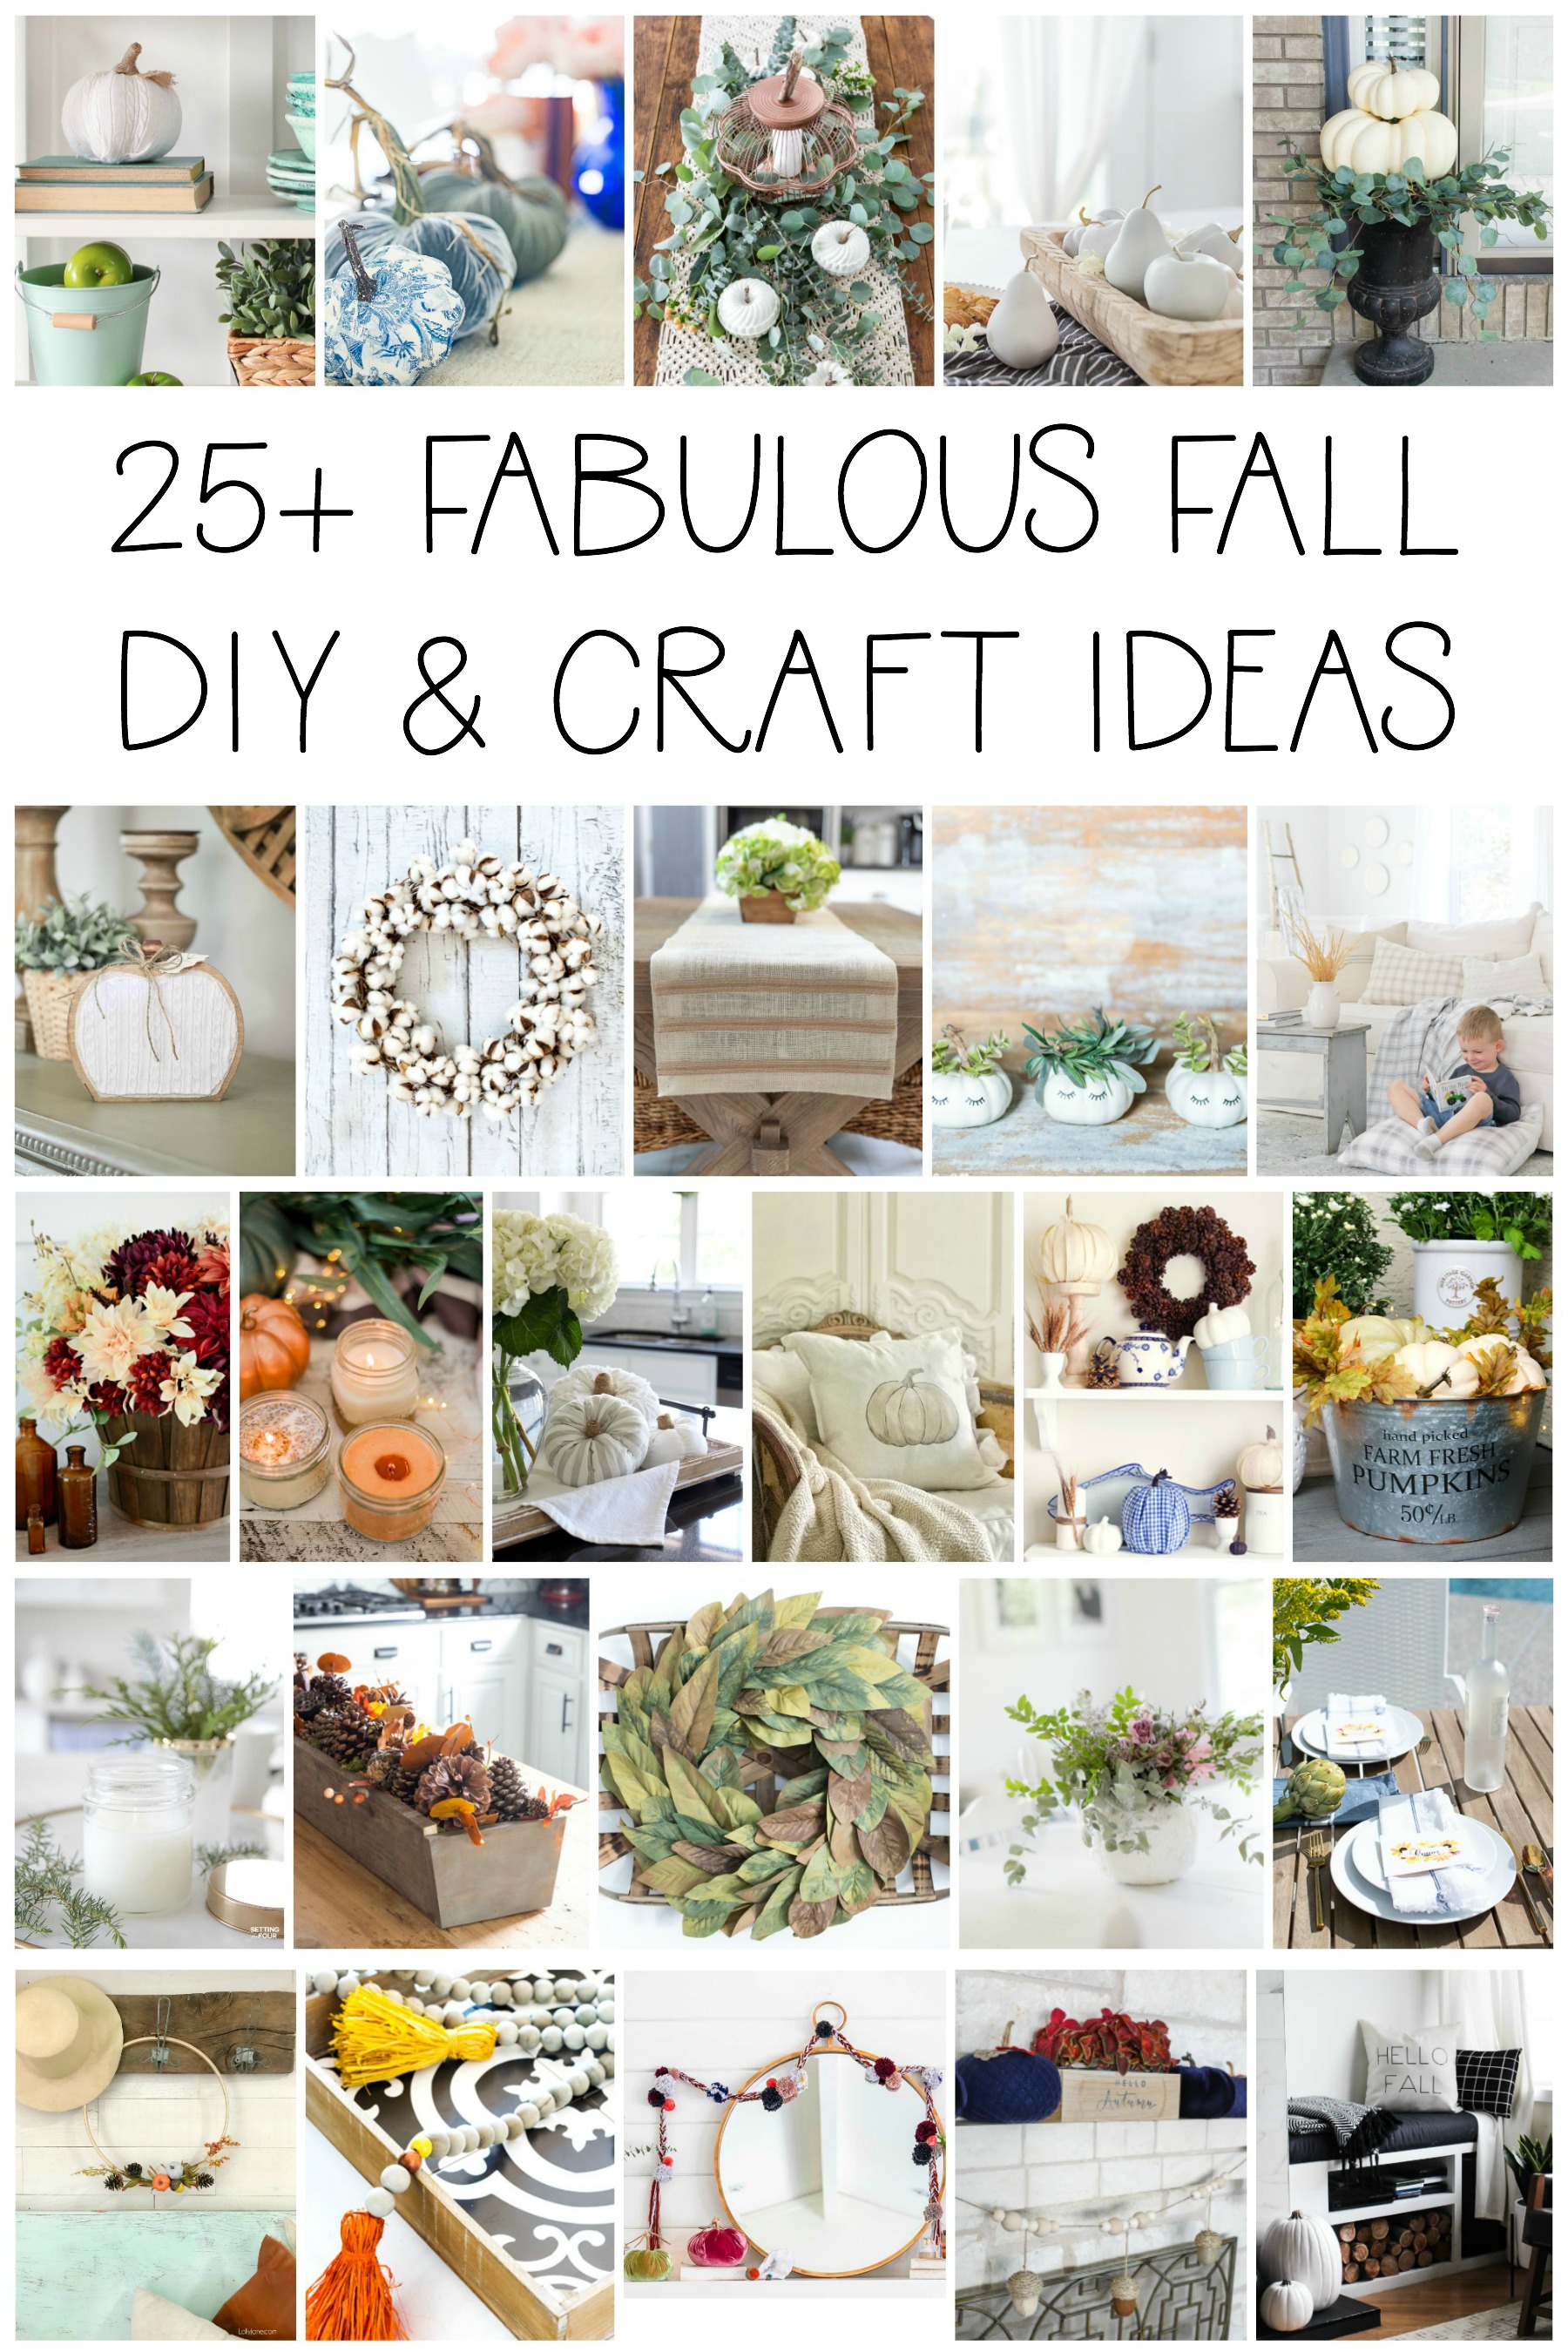 25 Fabulous Fall DIY and Craft Ideas poster.